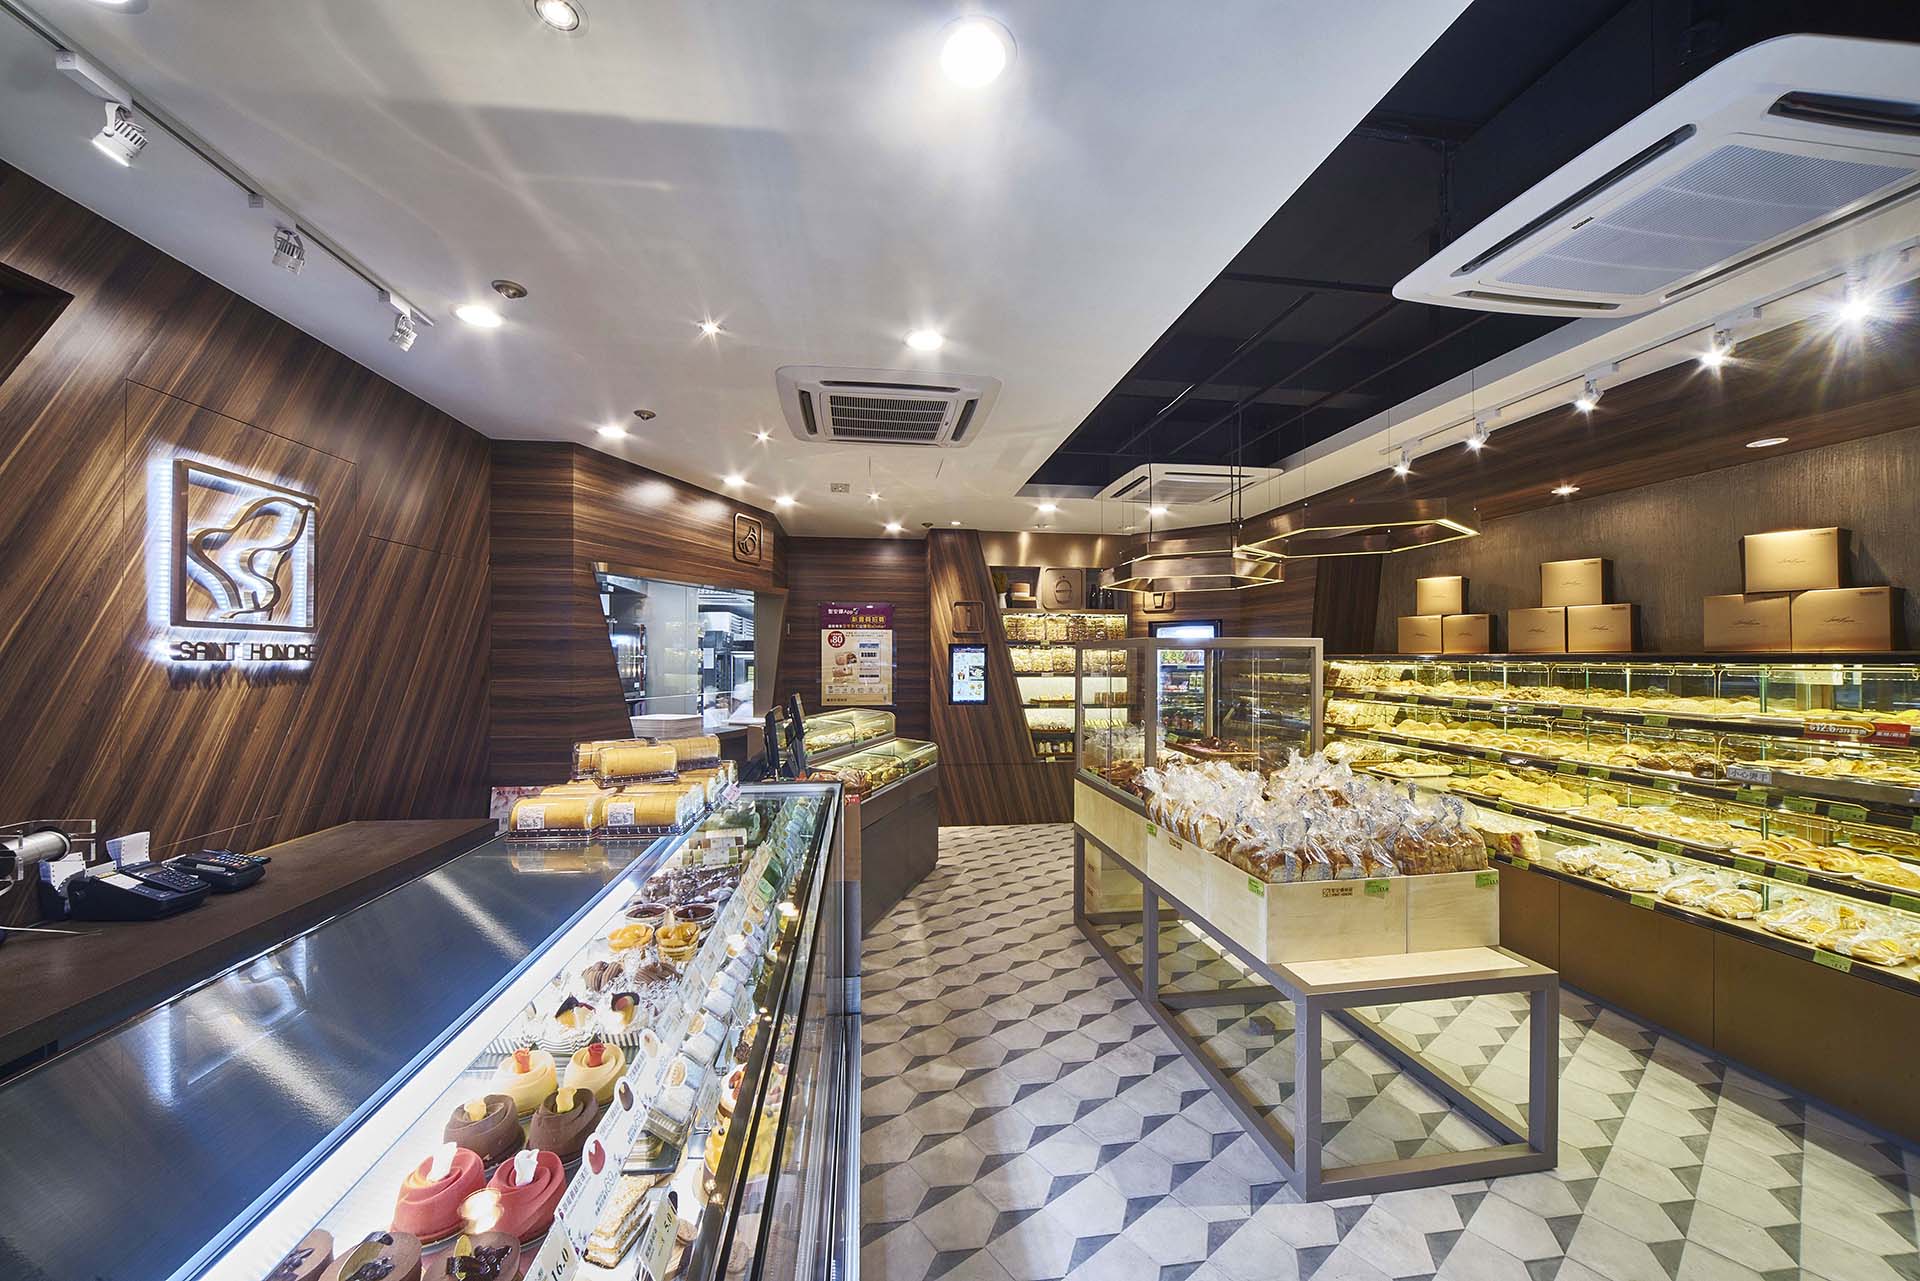 Saint Honore Cake Shop Lan Fong Road Hong Kong Store Interior Design and Styling by Plaap Design